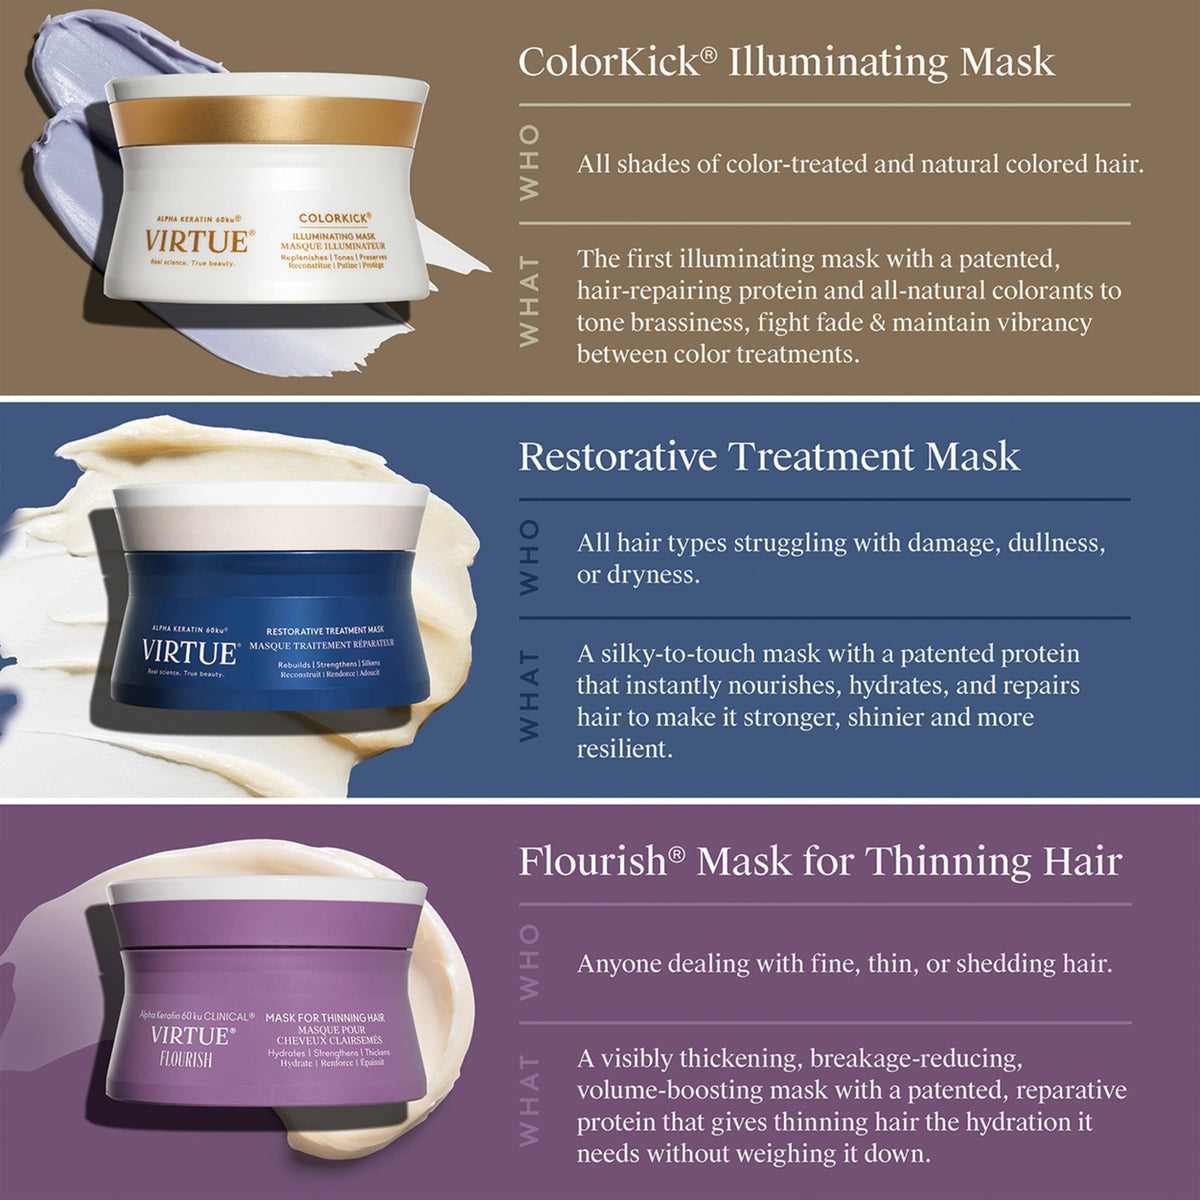 Virtue Colorkick Illuminating Mask . This product is for blonde hair